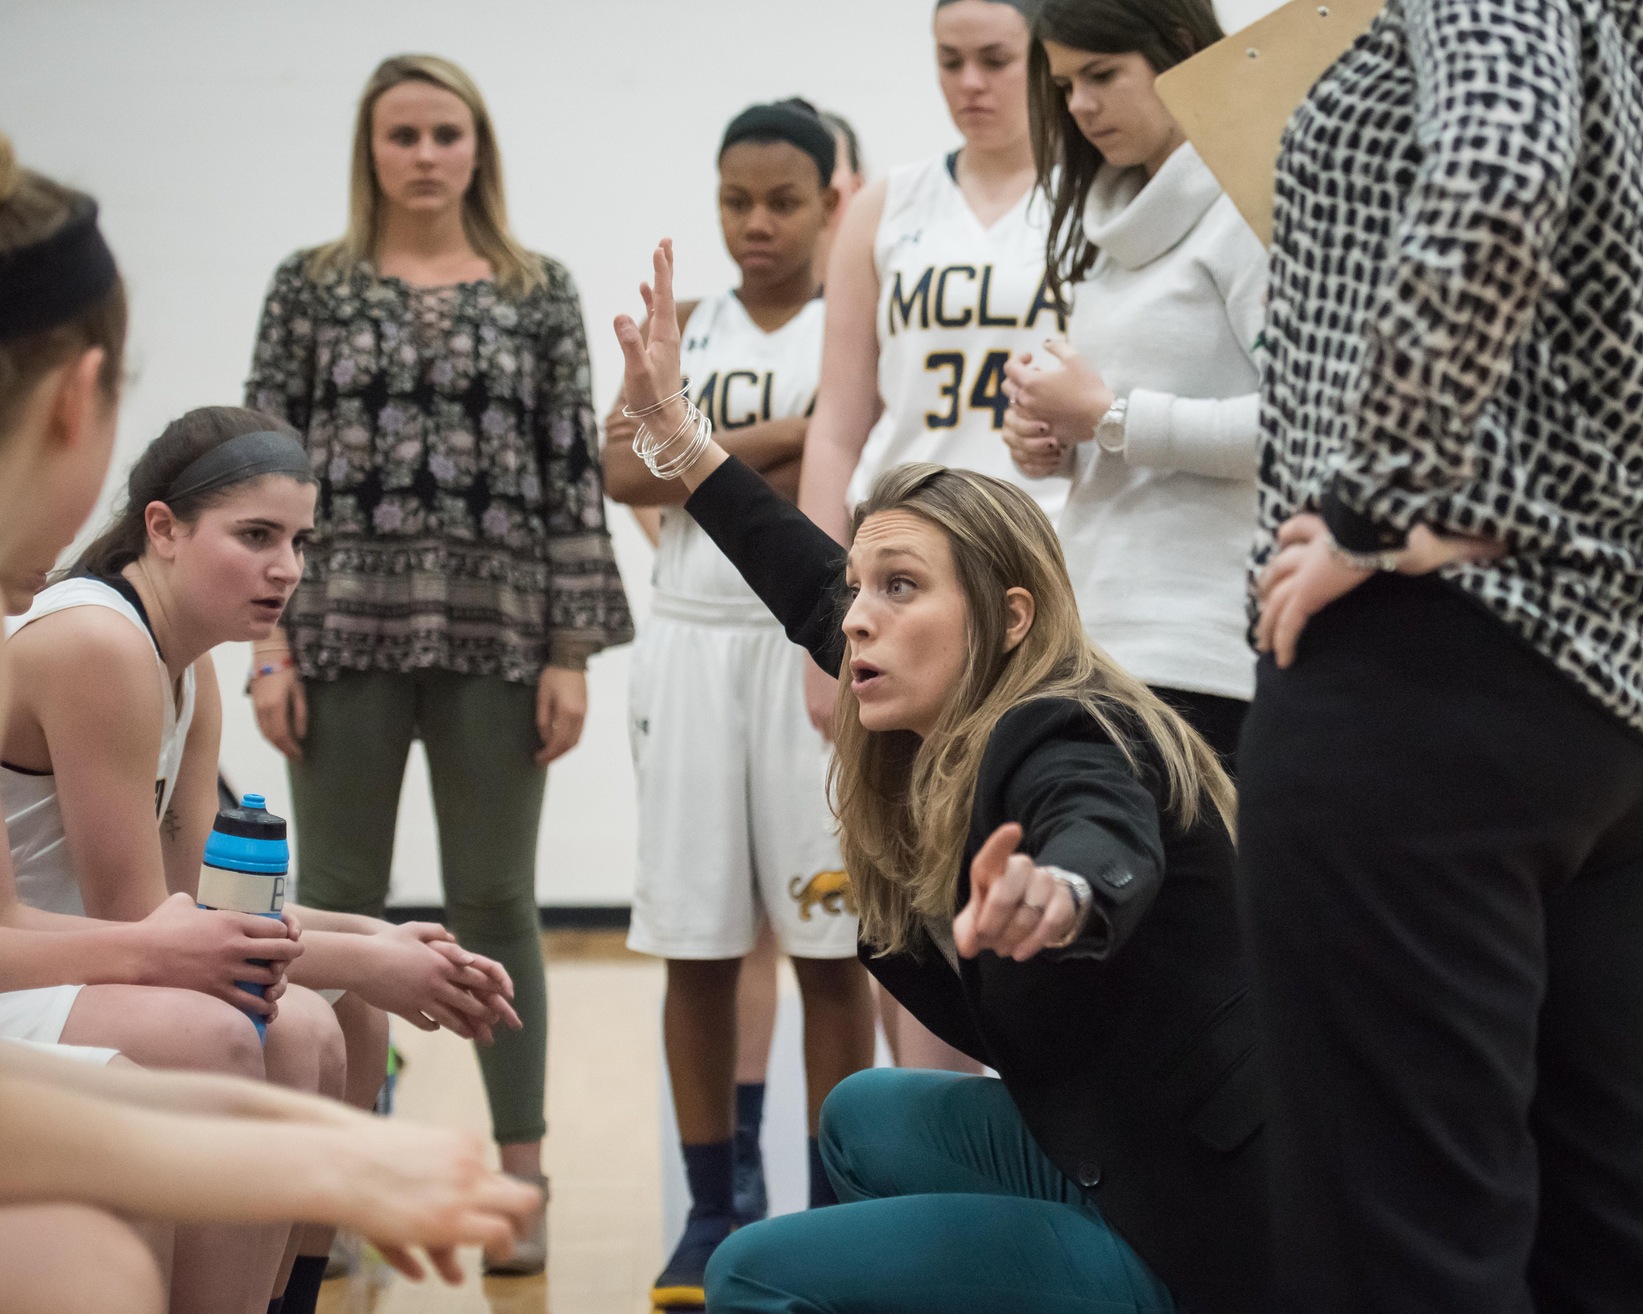 Women's Basketball will be sixth seed in MASCAC Championships